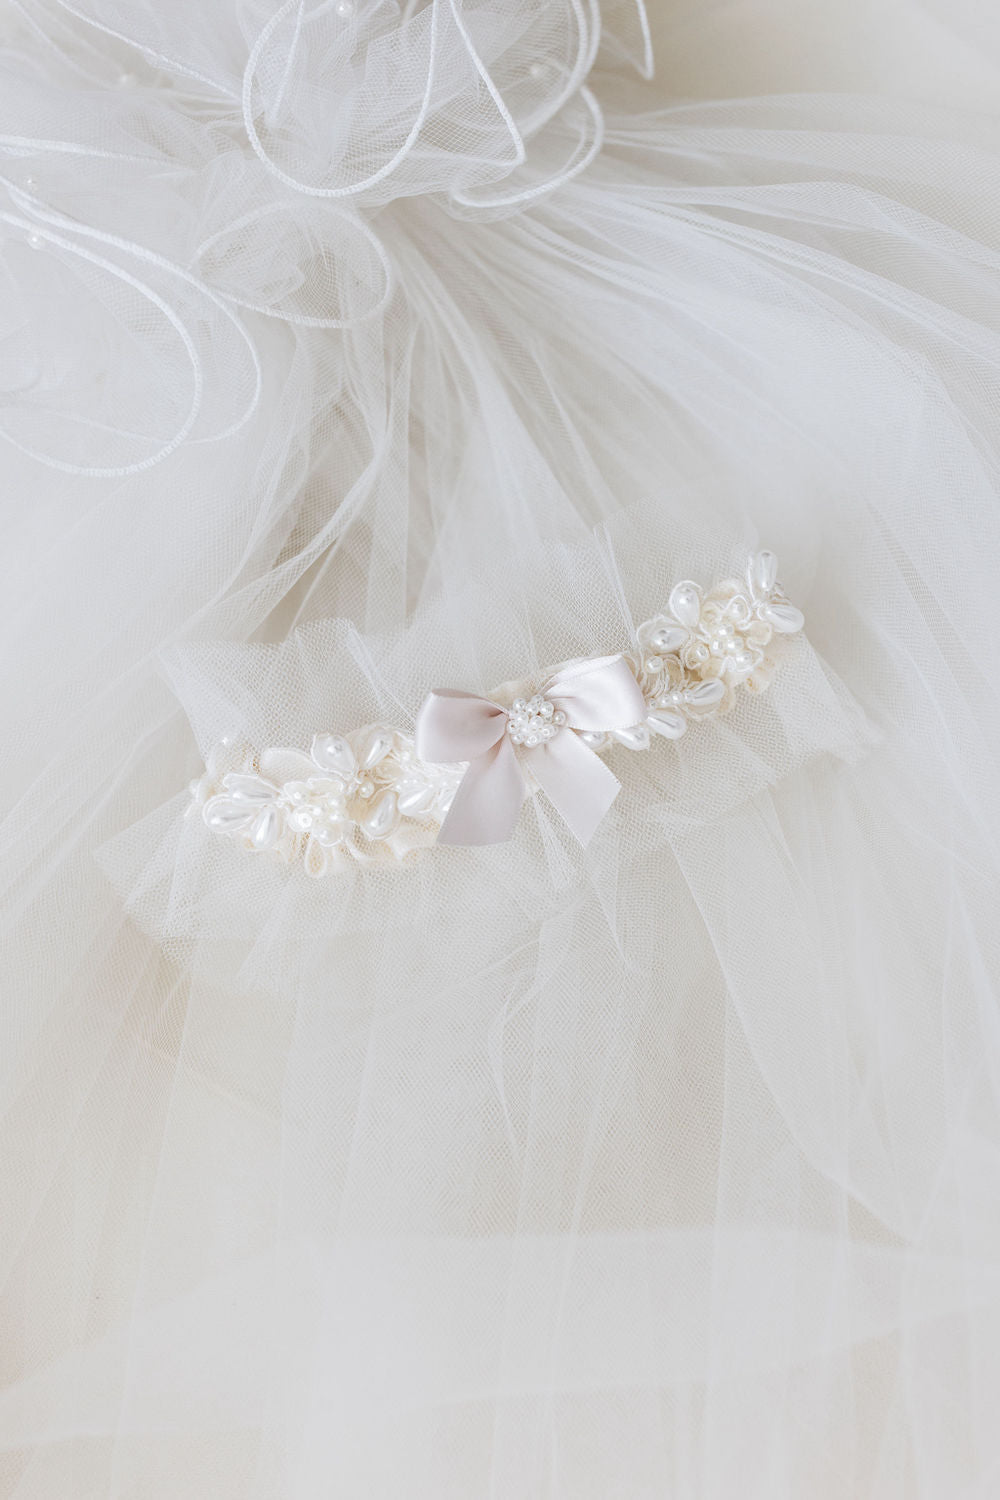 wedding garter with lace, tulle, and pearls from bride's mother's dress and personalized embroidery - a handmade wedding heirloom by The Garter Girl